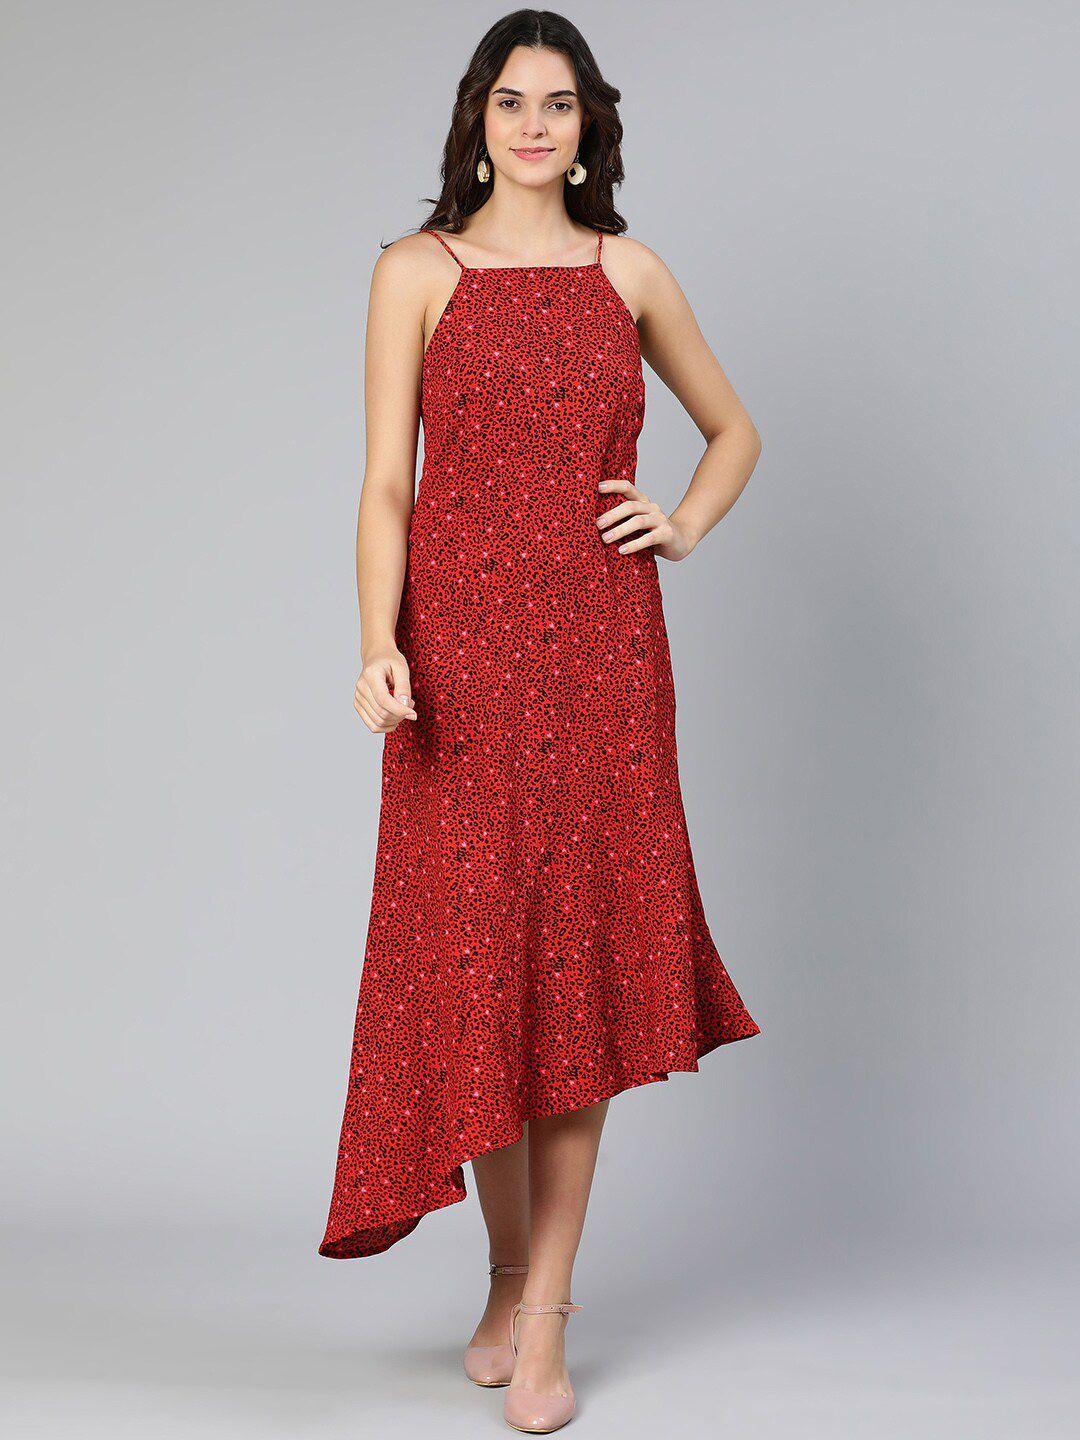 oxolloxo red floral satin a-line midi dress